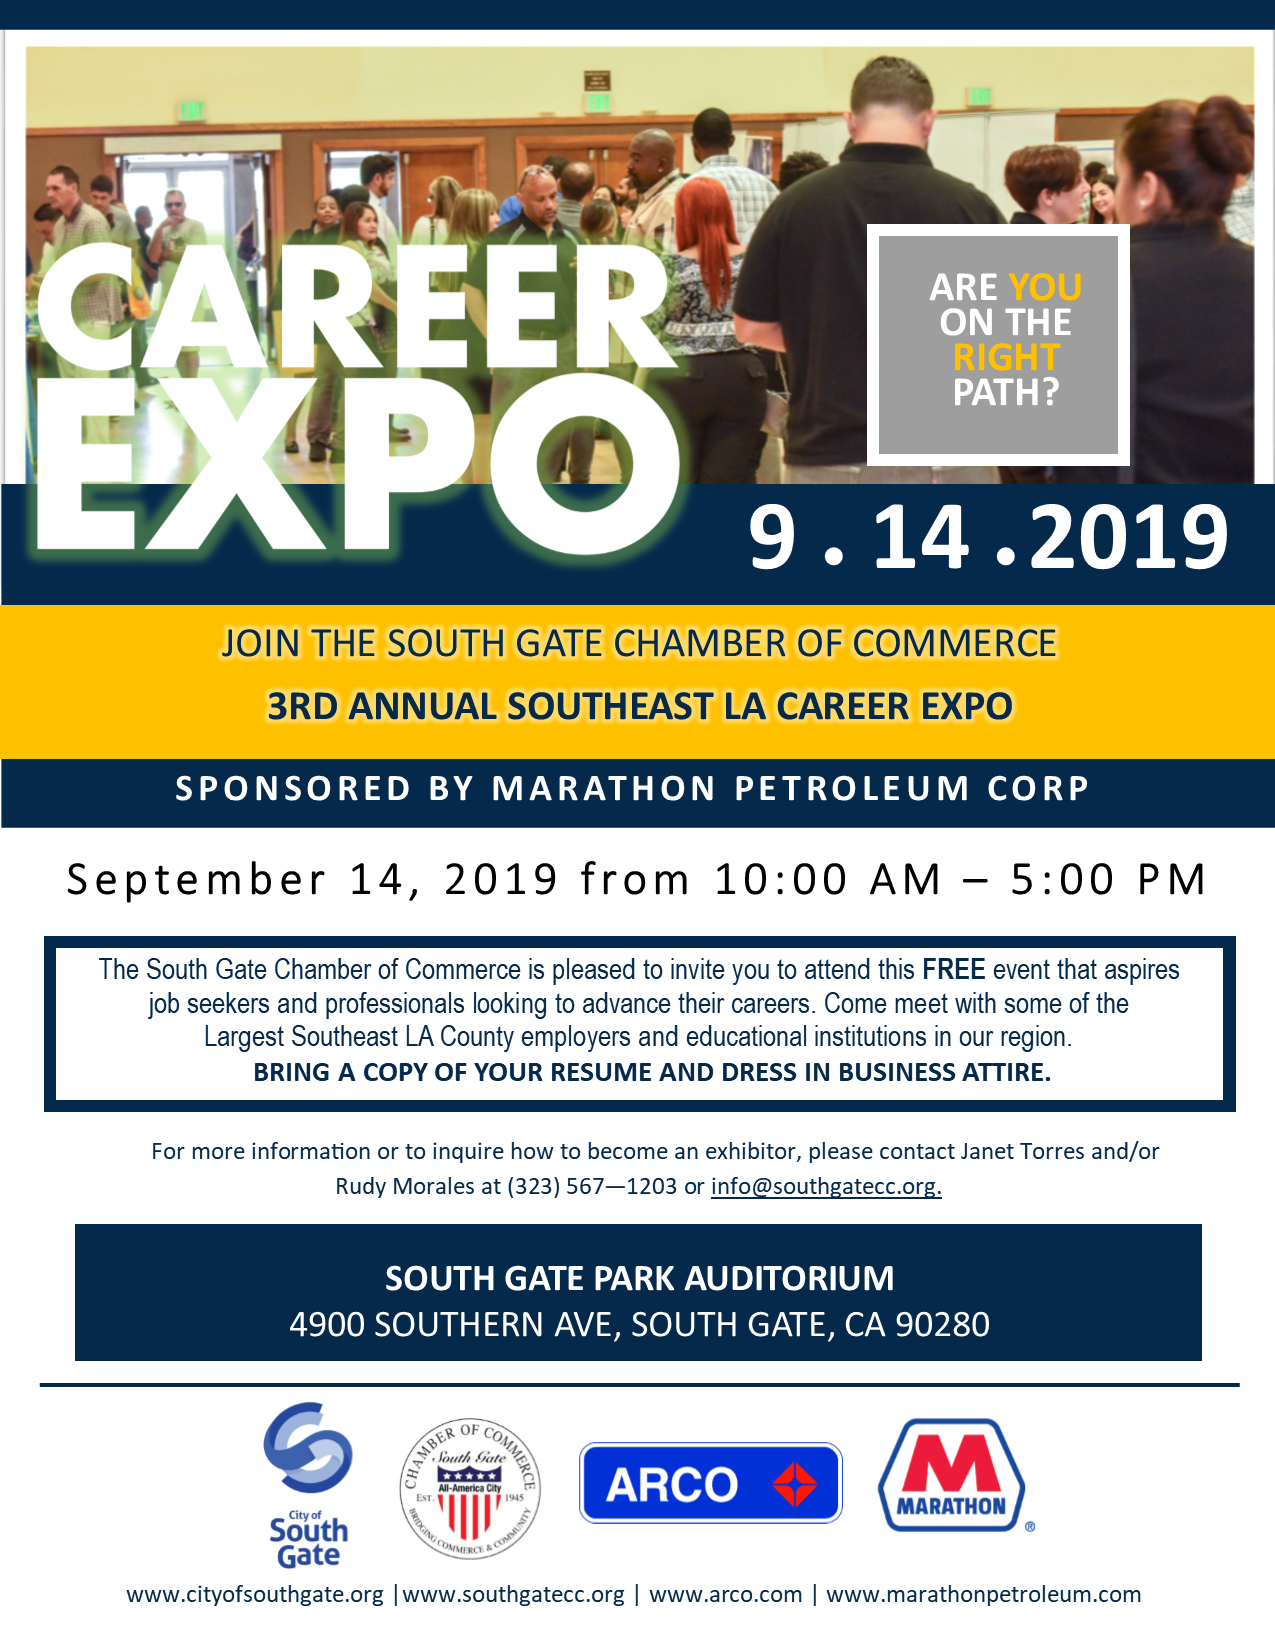 3rd Annual Career Expo South Gate Chamber of Commerce